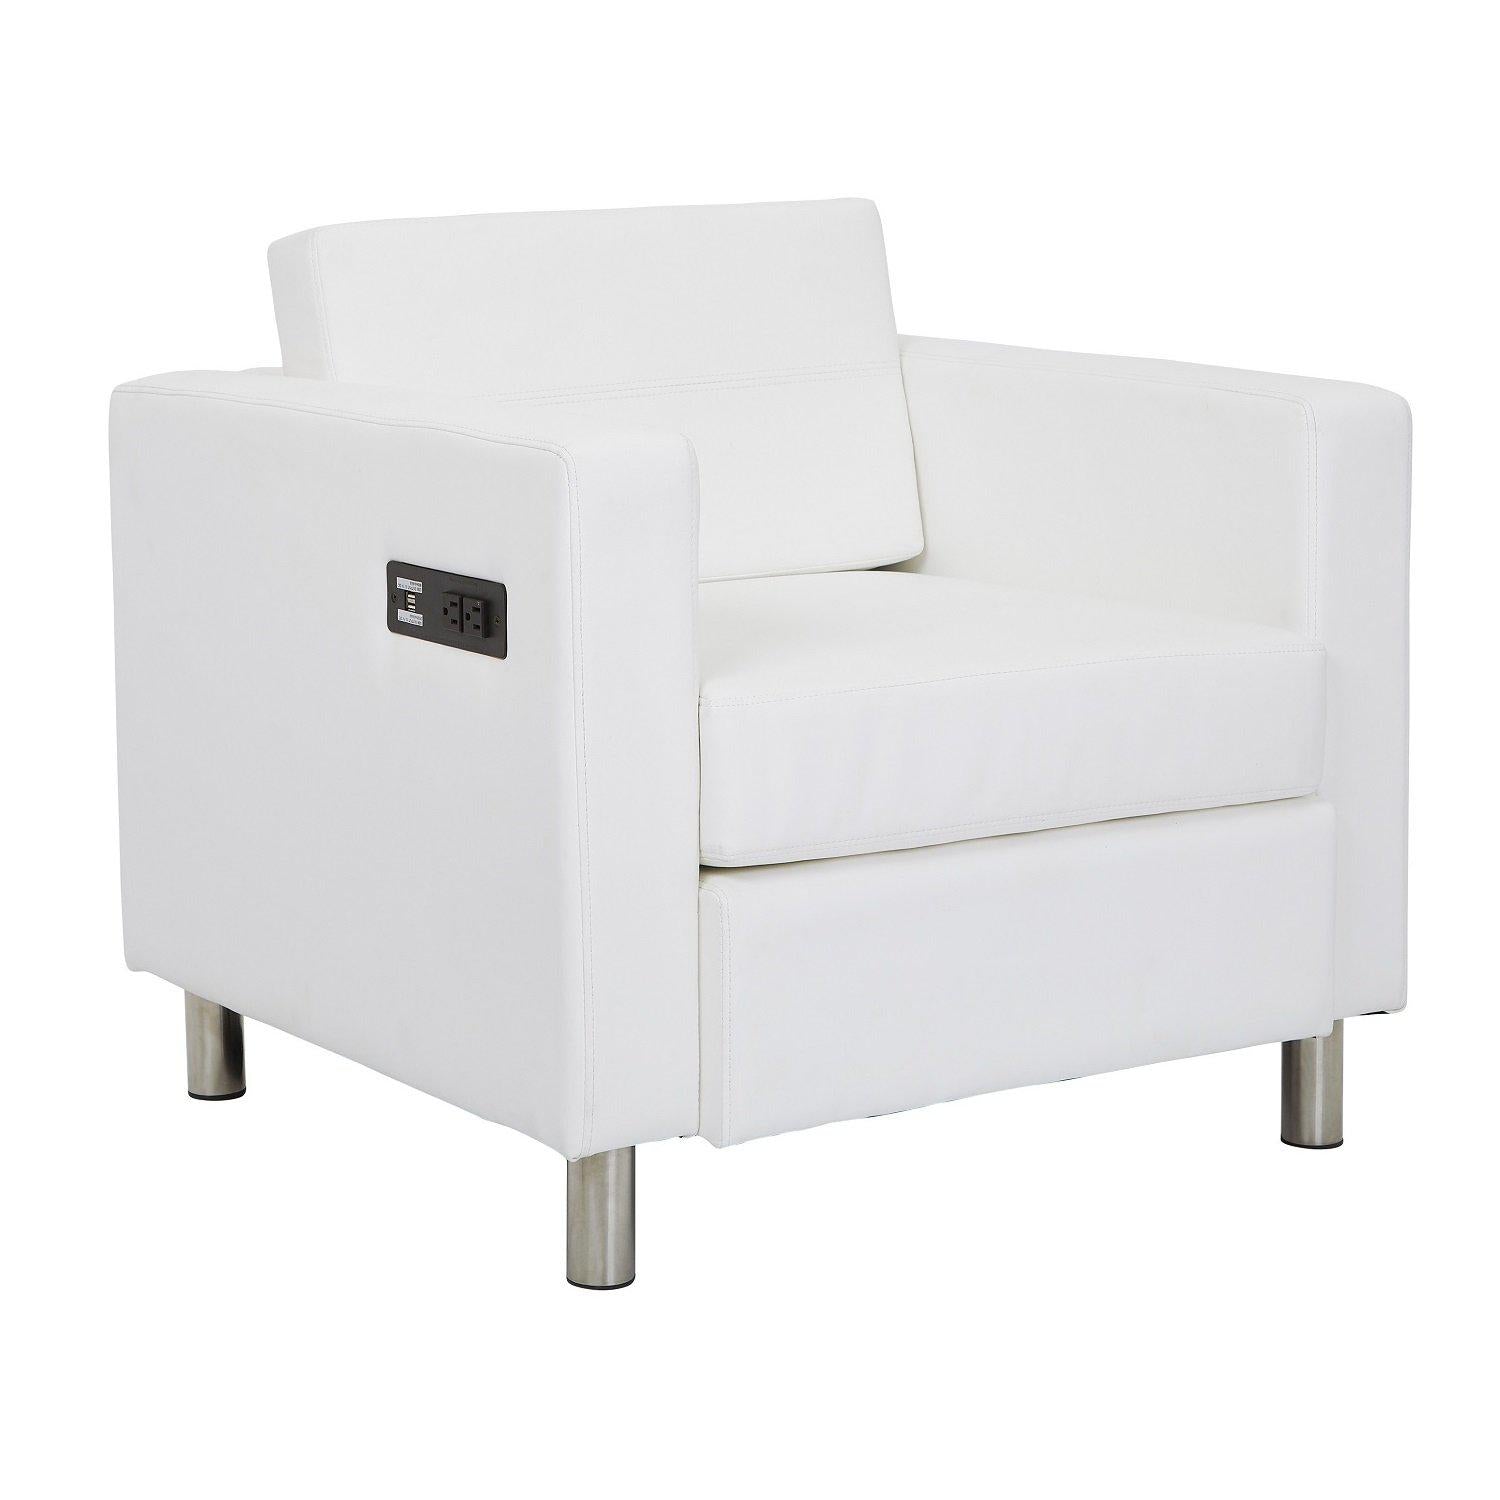 Atlantic Reception Seating Arm Chair with Charging Station, Antimicrobial Vinyl Upholstery